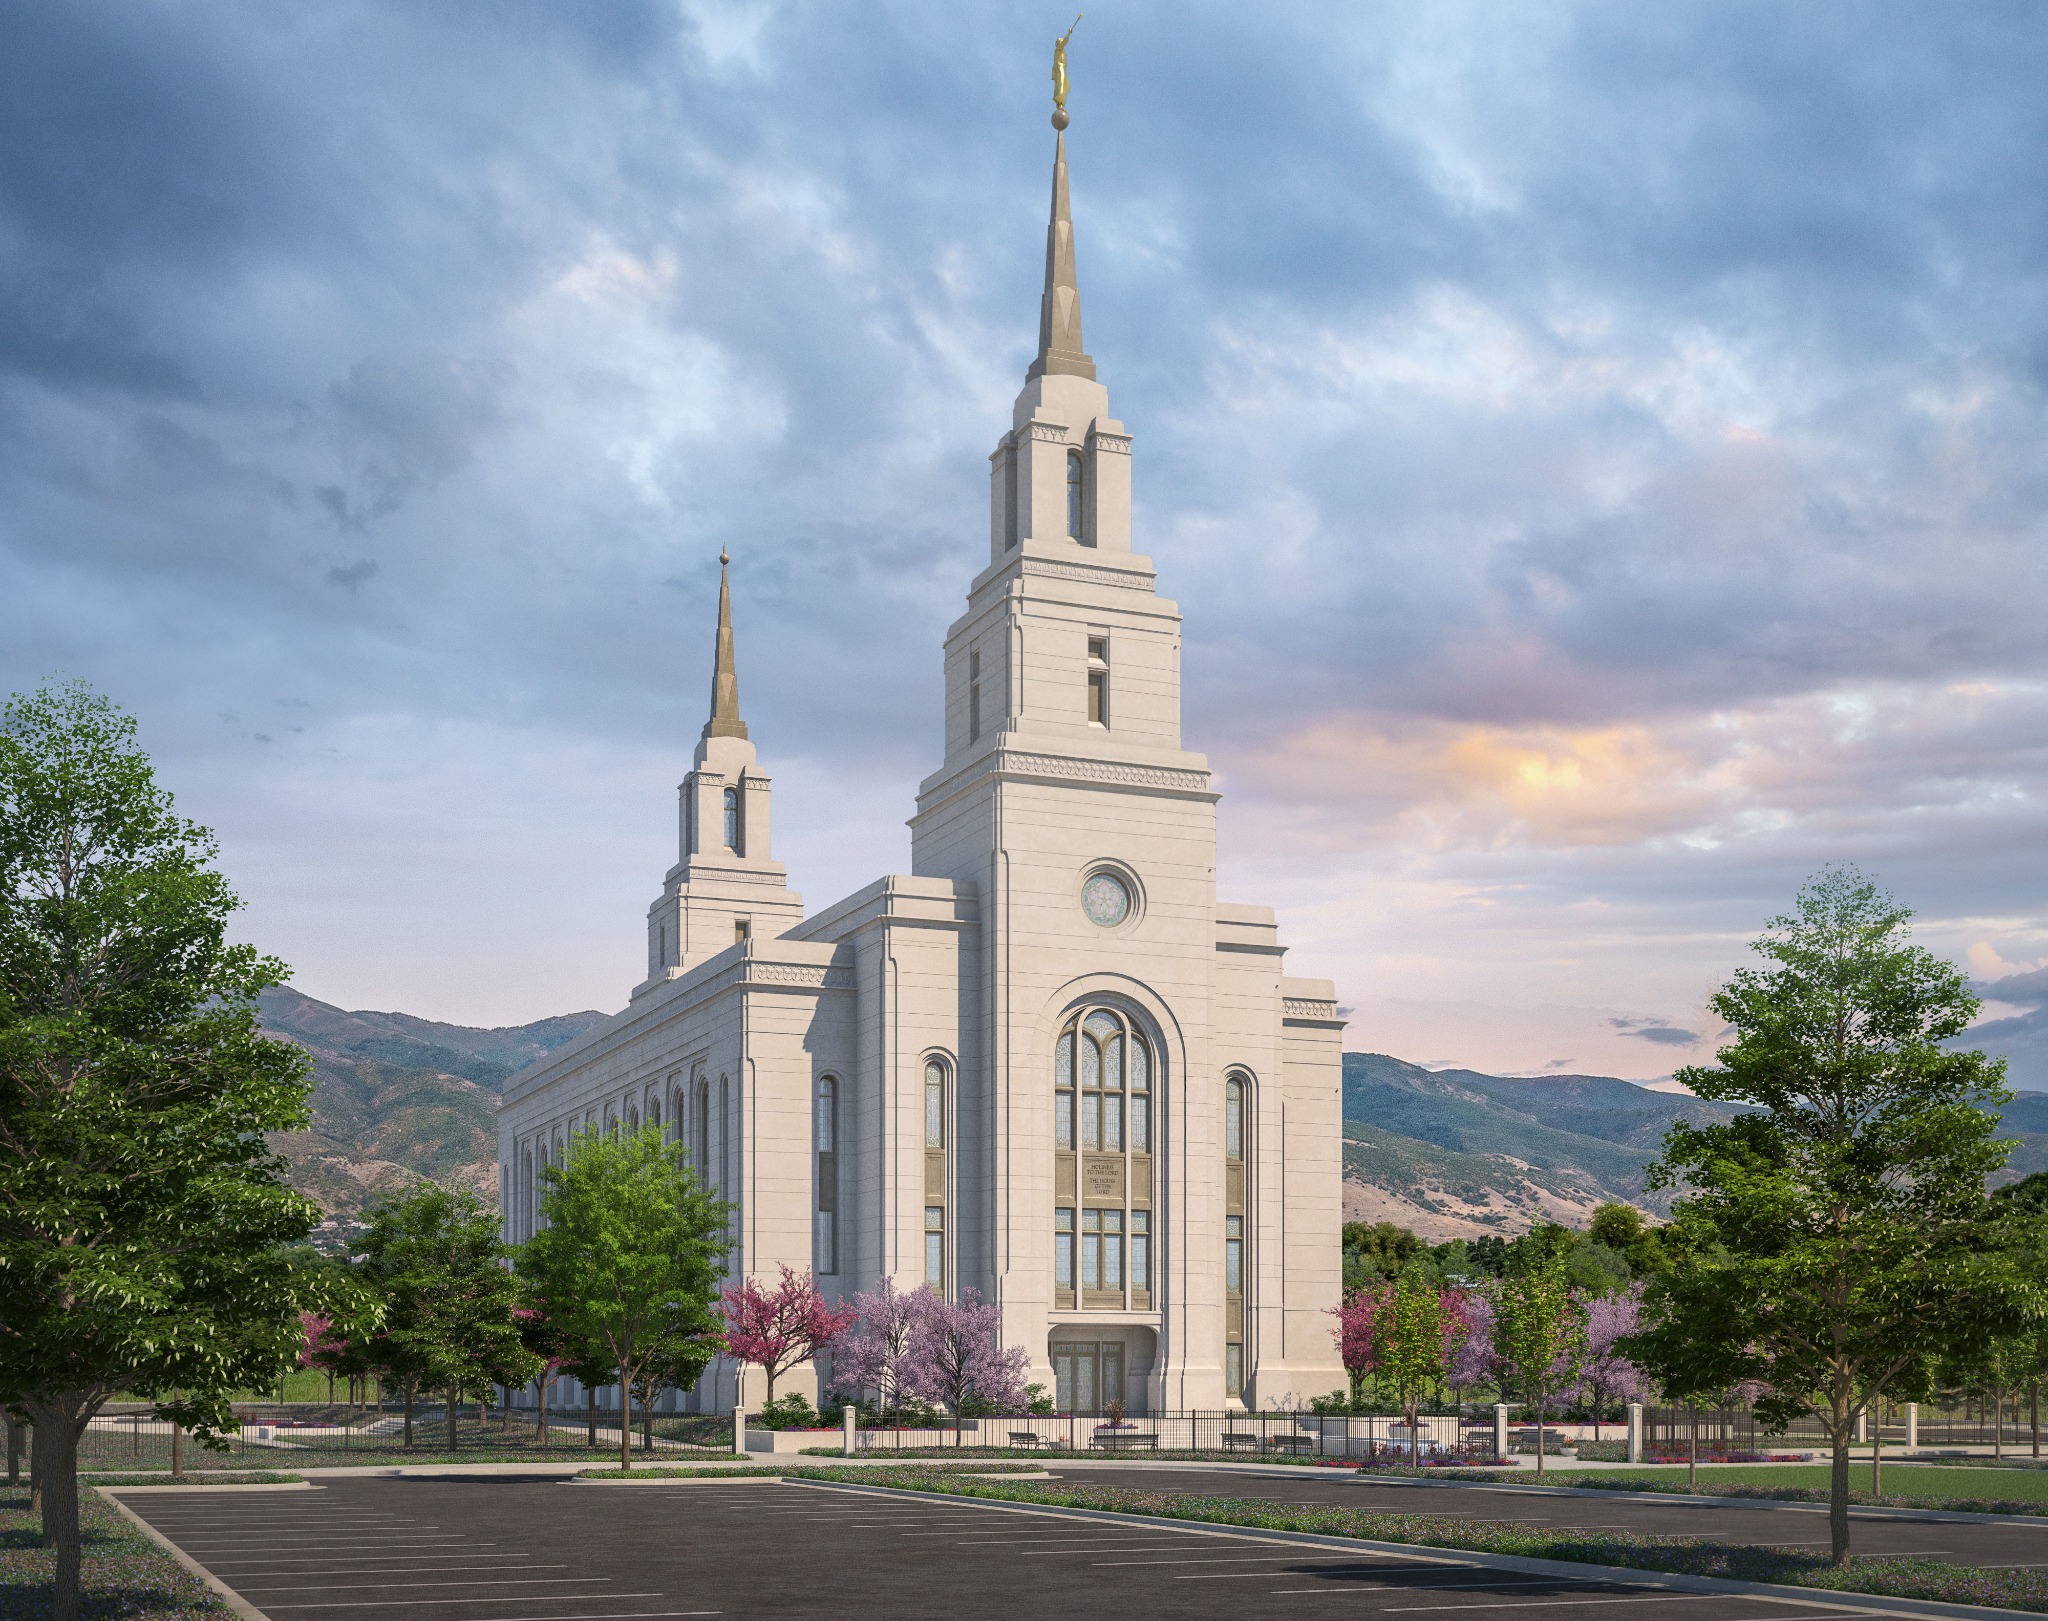 Groundbreaking date set for Knoxville Tennessee Temple – Church News